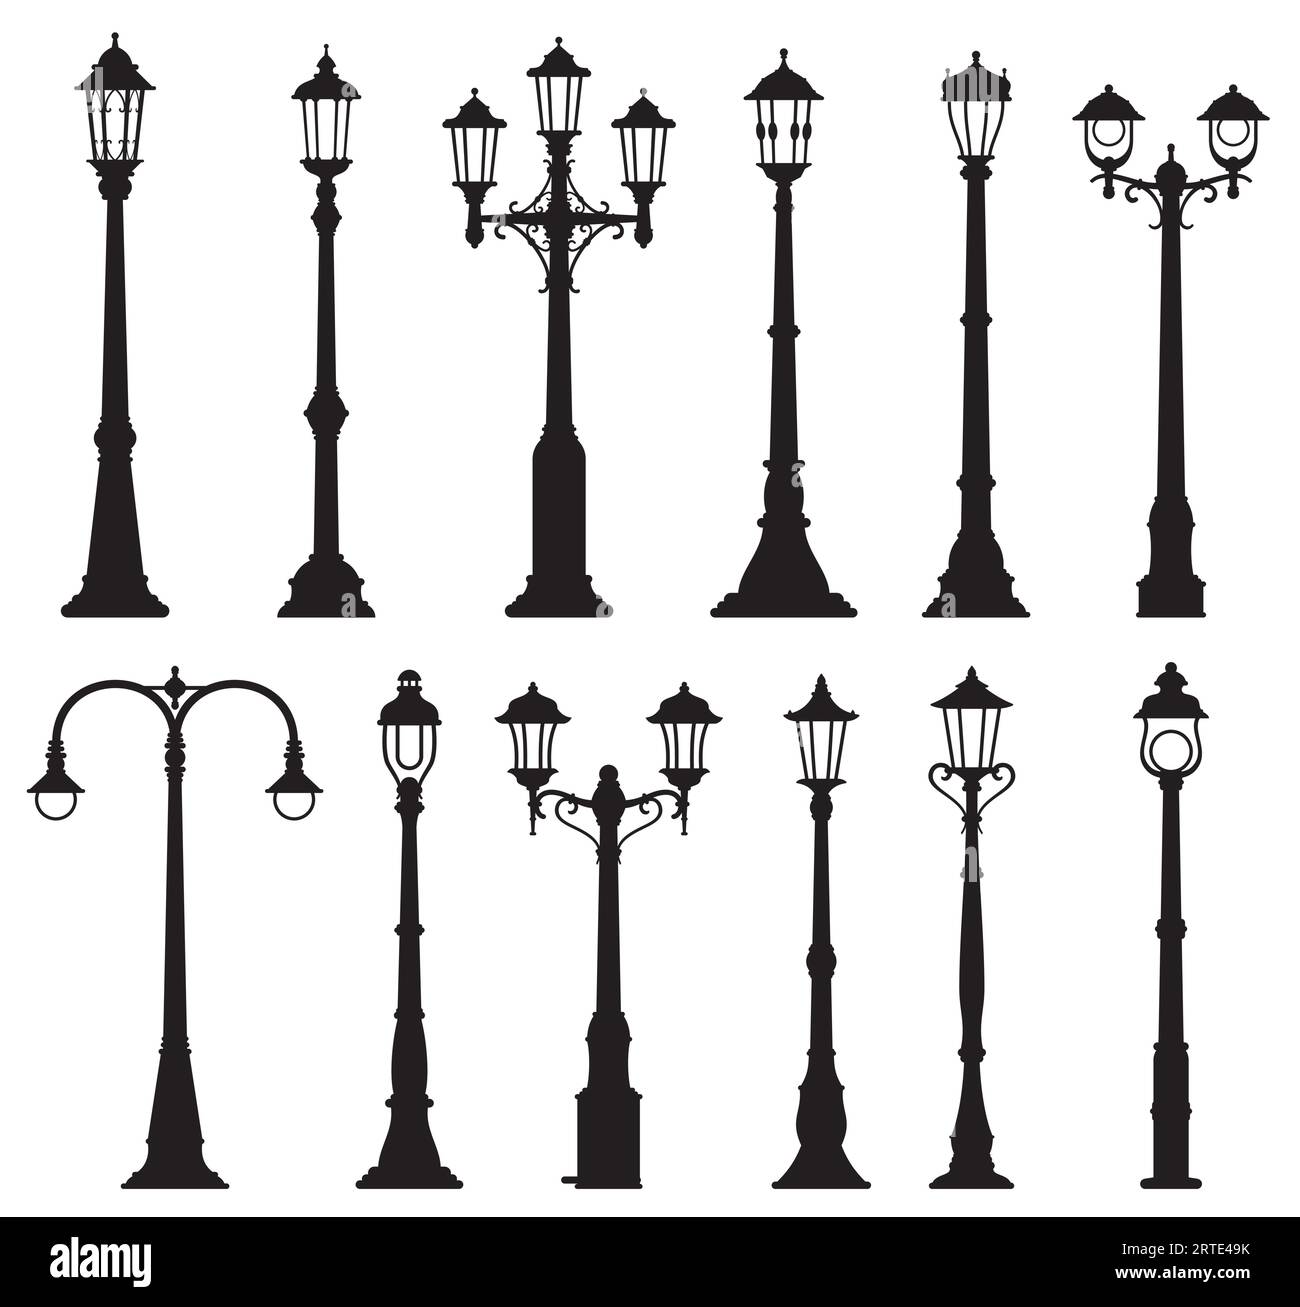 Isolated streetlight lamps, vintage lamppost or streetlamp and lanterns, vector silhouette icons. Old street light pillars, retro lantern poles or city illumination lampposts with gas or light bulbs Stock Vector